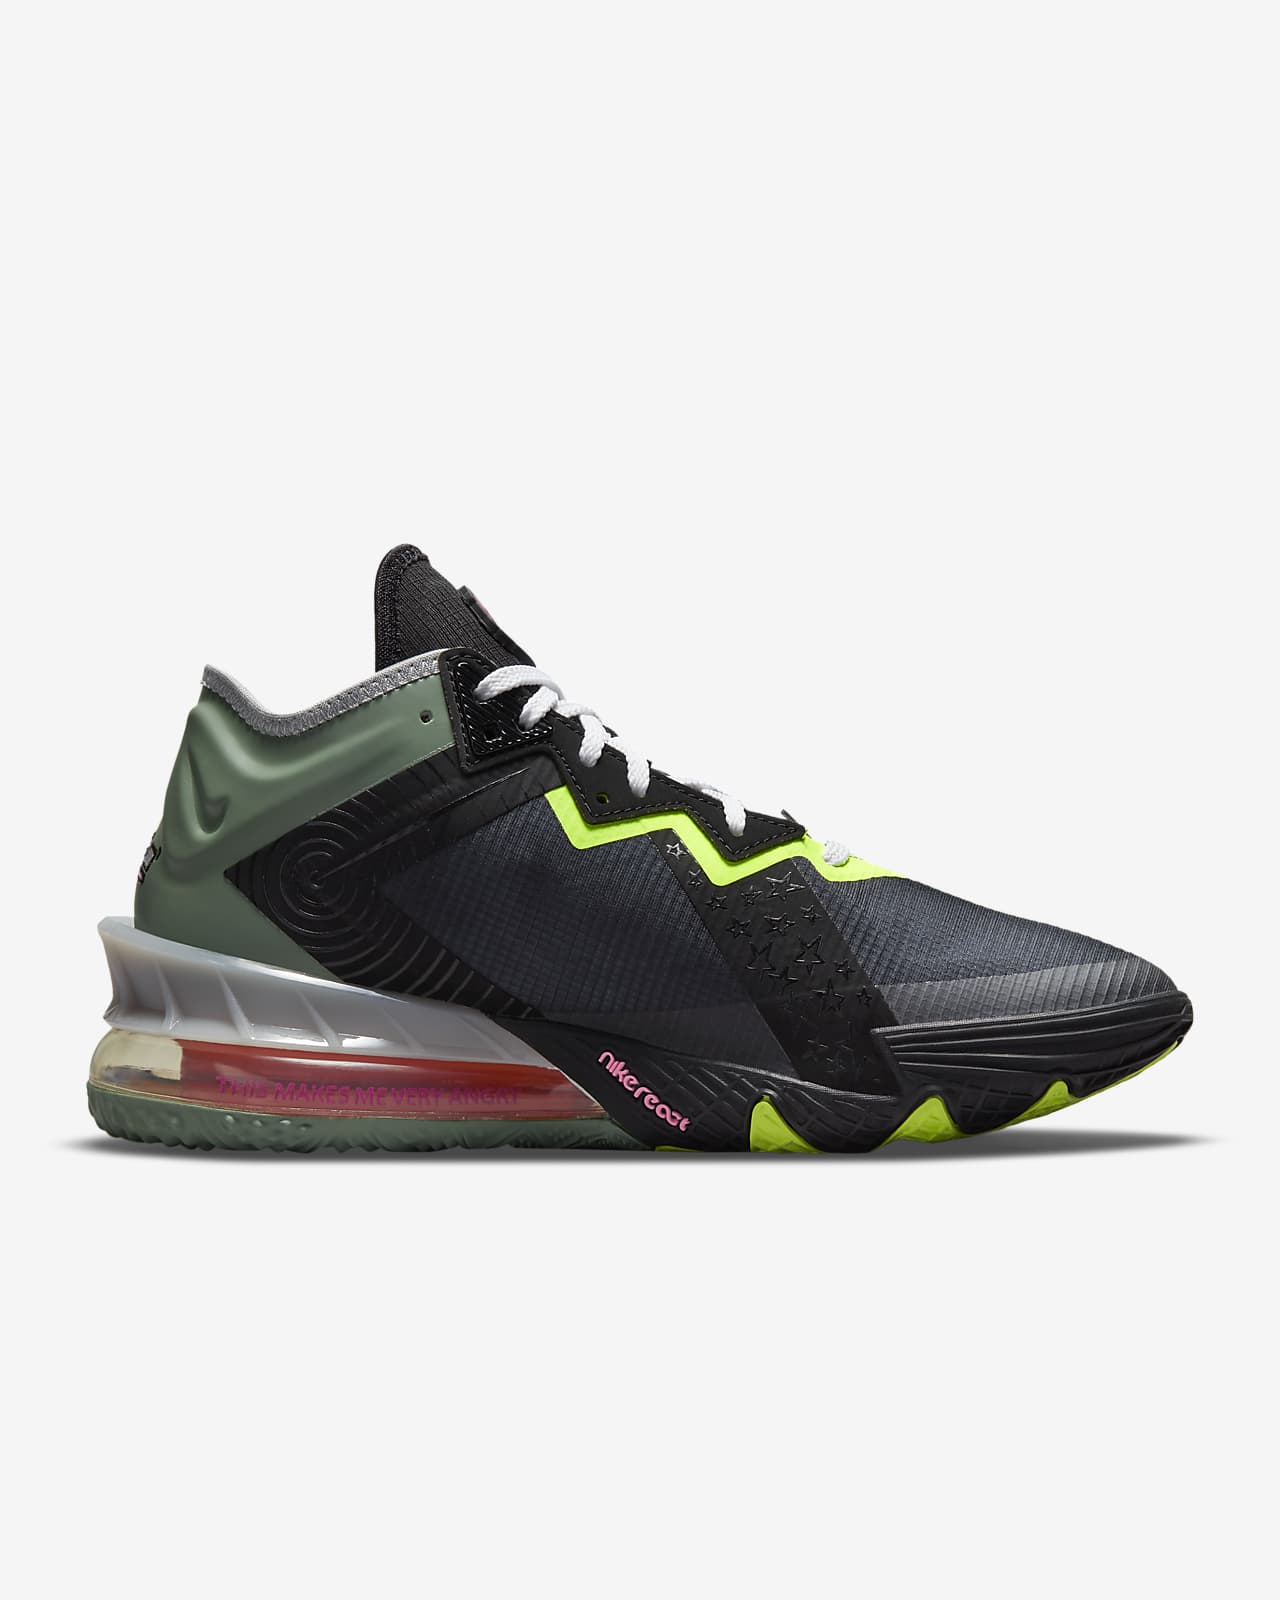 LeBron 18 Low 'Bugs vs Marvin' Basketball Shoes